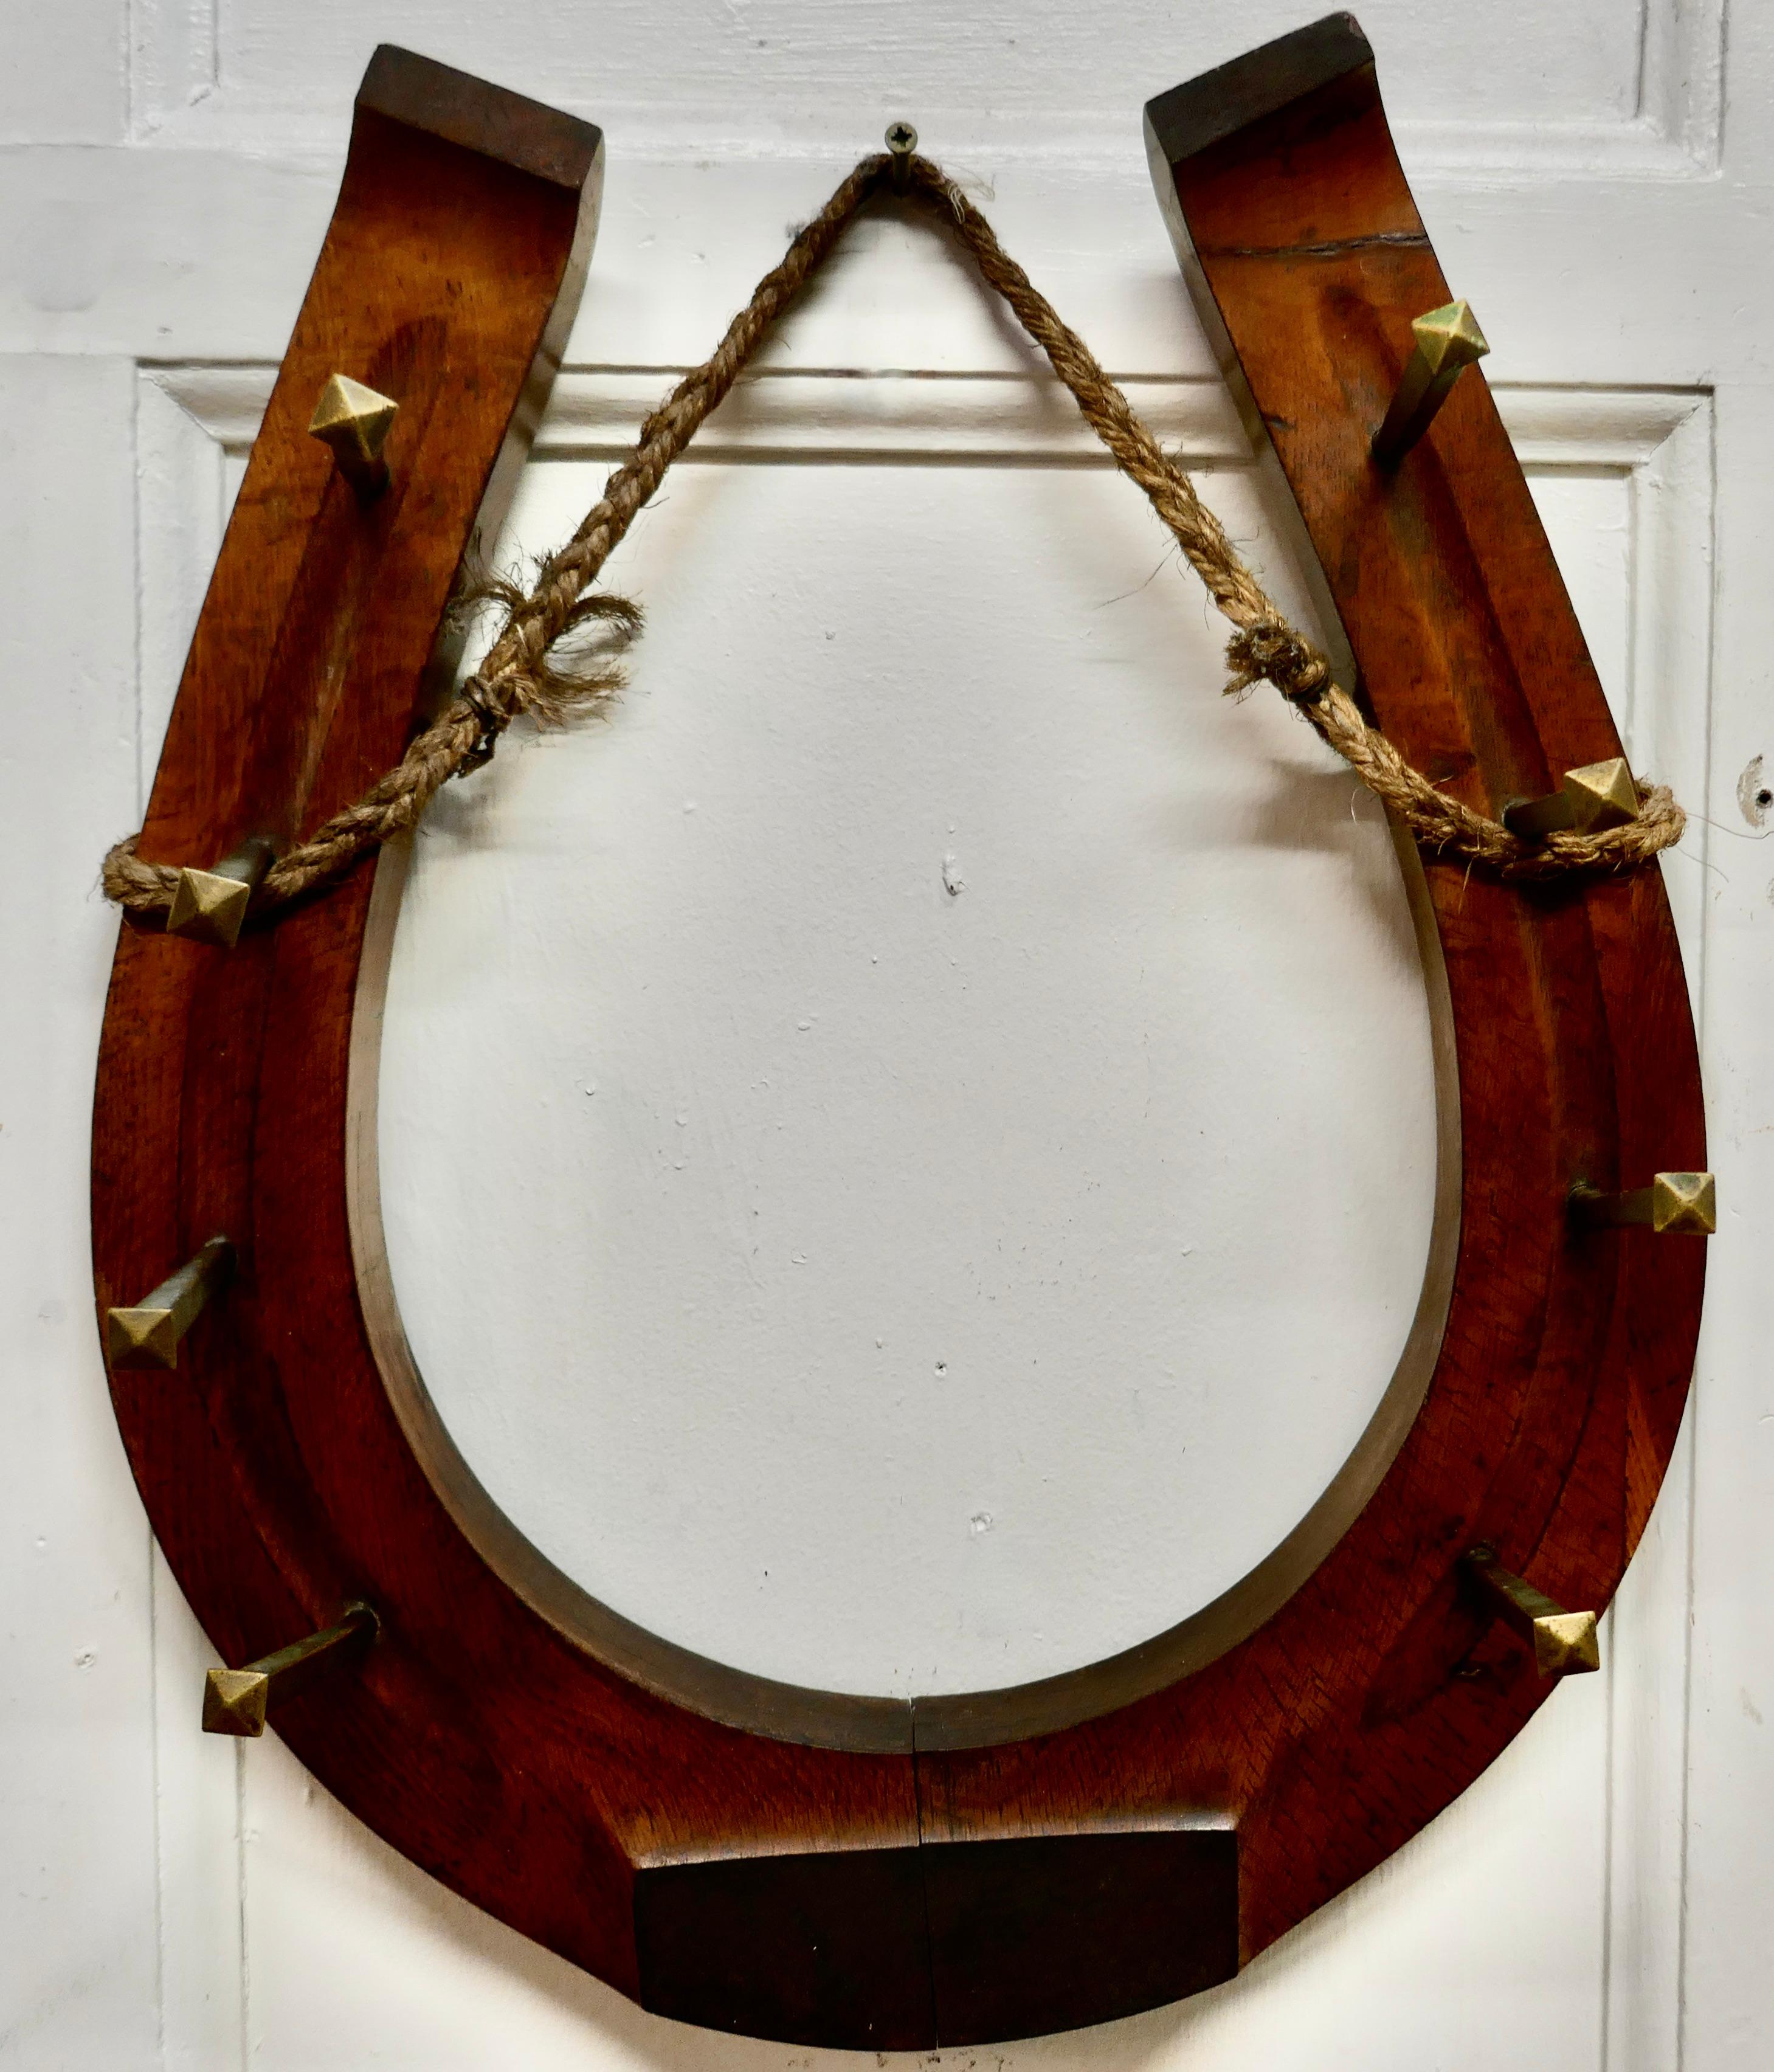 French Artisan folk art oak horseshoe coat hooks.

Beautifully made in 3” wide solid oak and in the shape of a horseshoe with 8 hand forged brass nails forming the hooks, good for coats or hats.
The rack is 18” high 15” wide and it is 4” out from